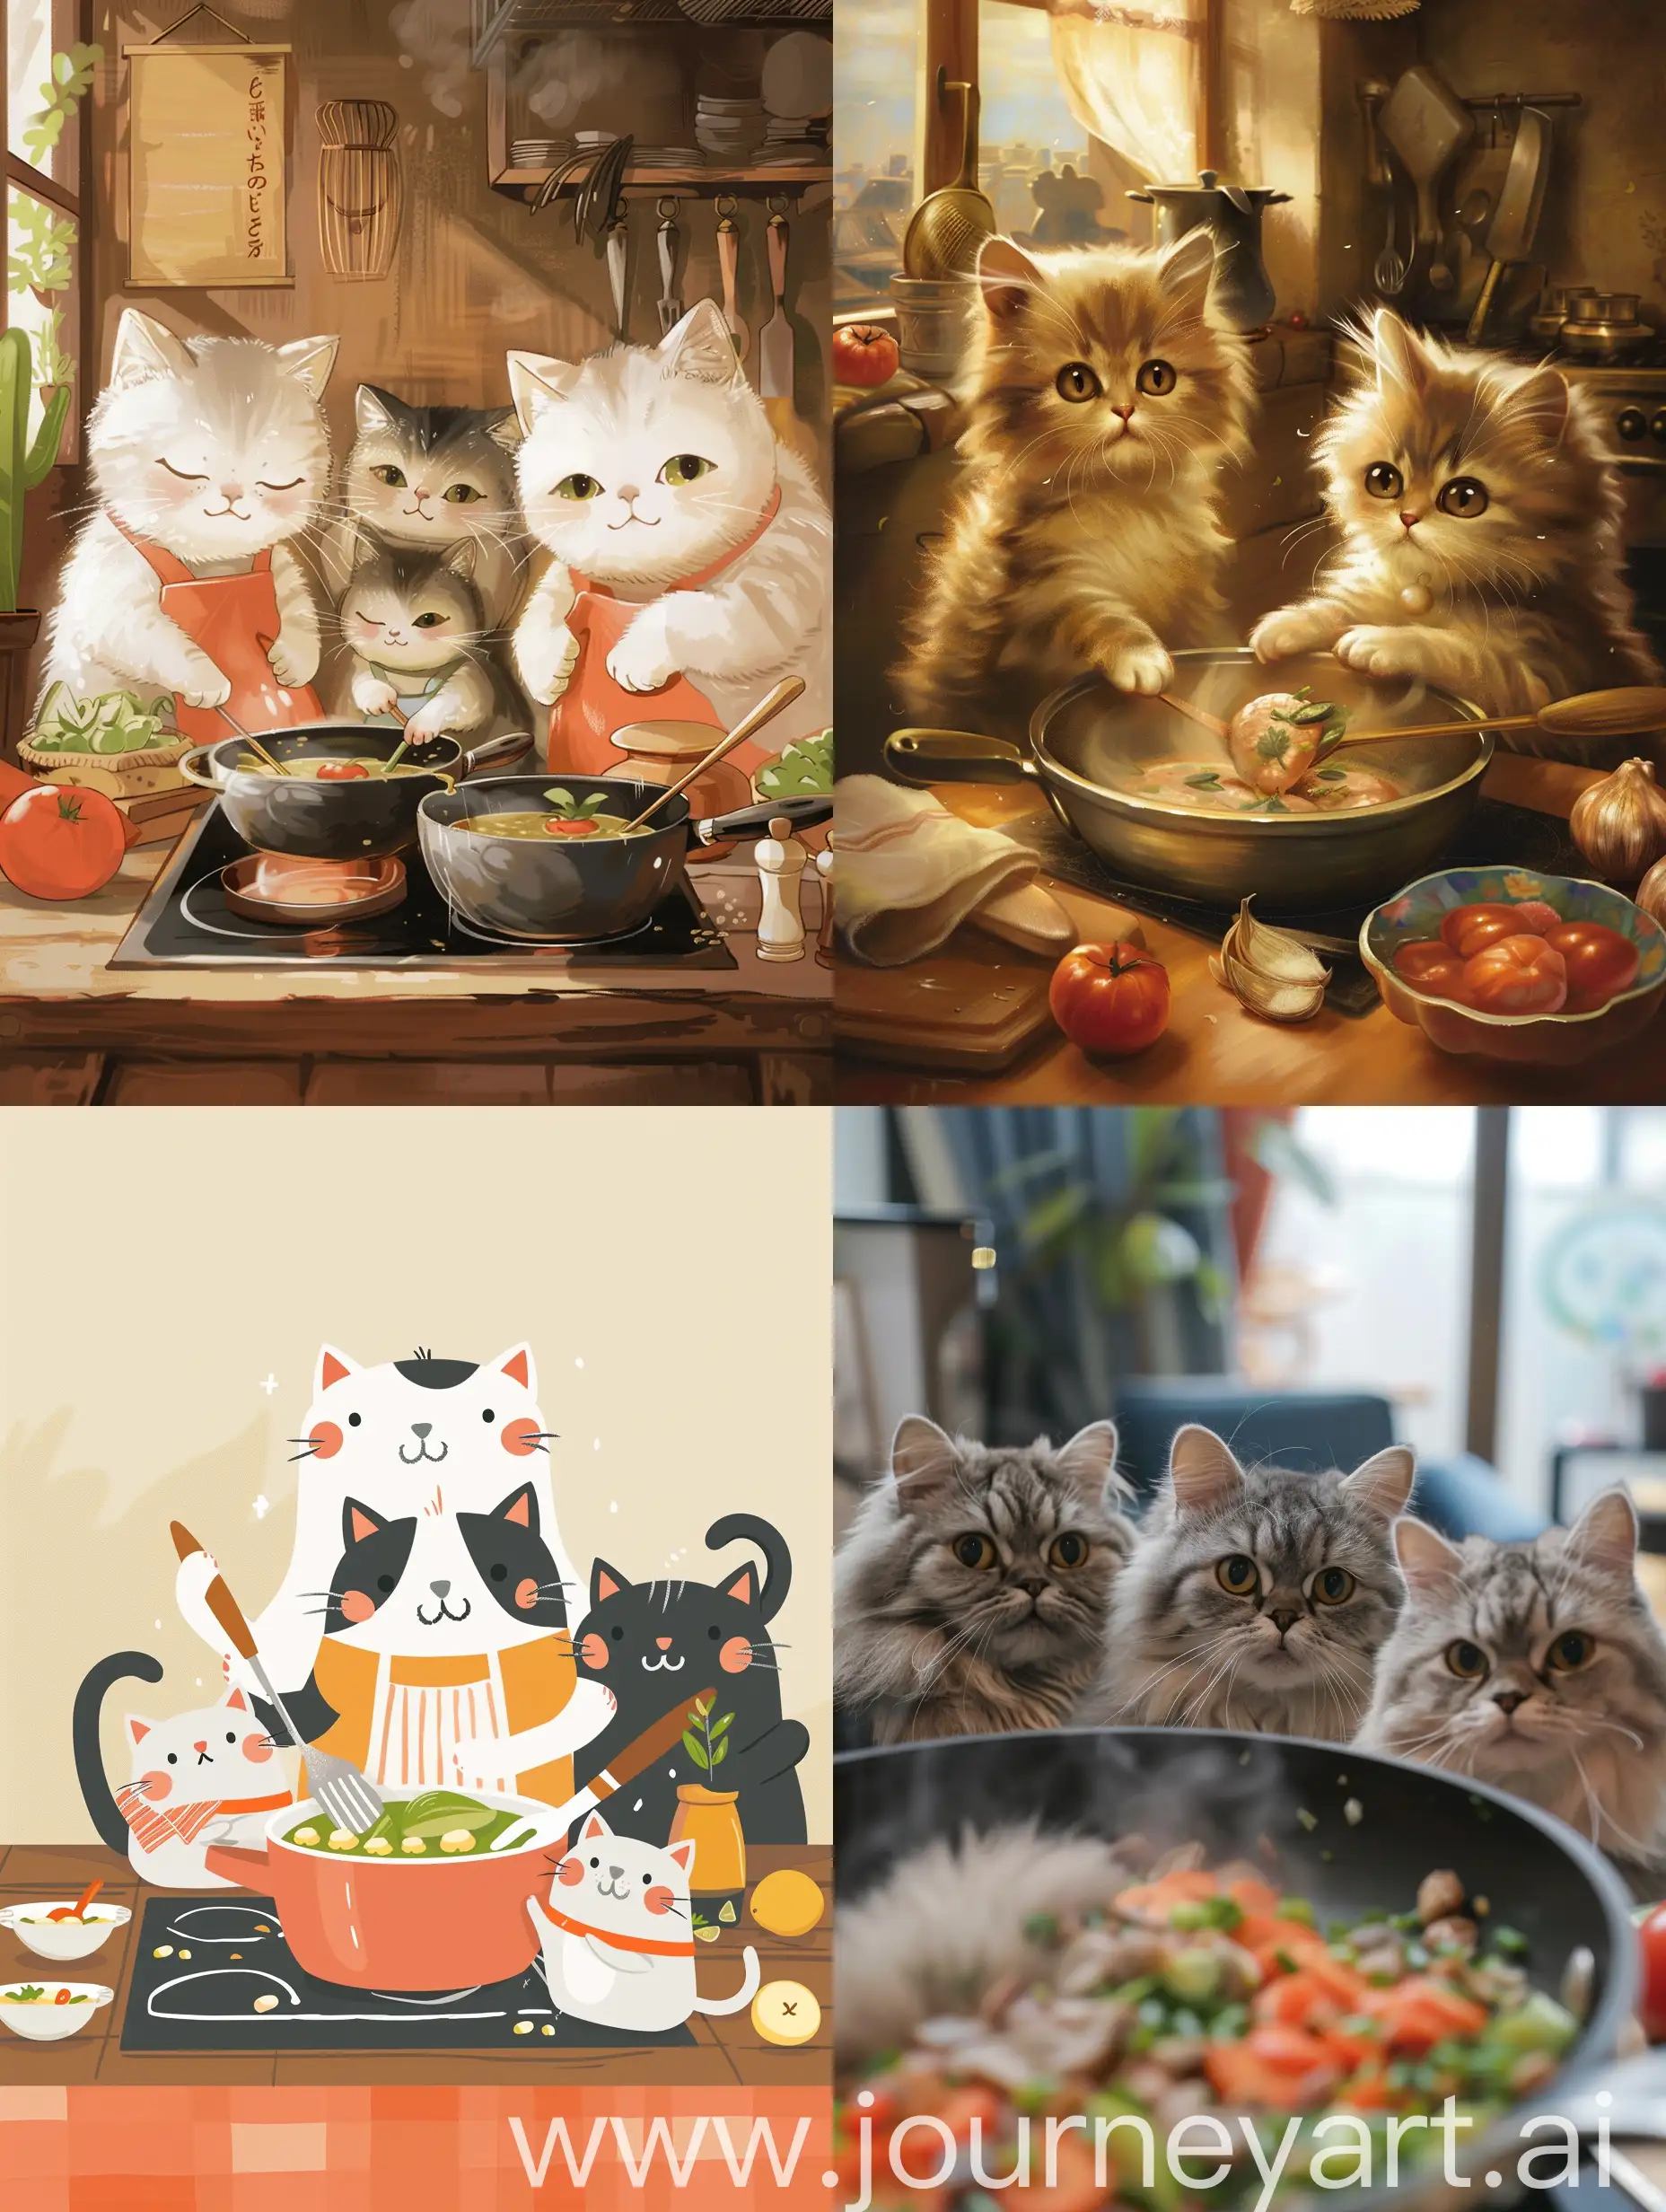 Cat family are cooking together with love.There are fat cat.